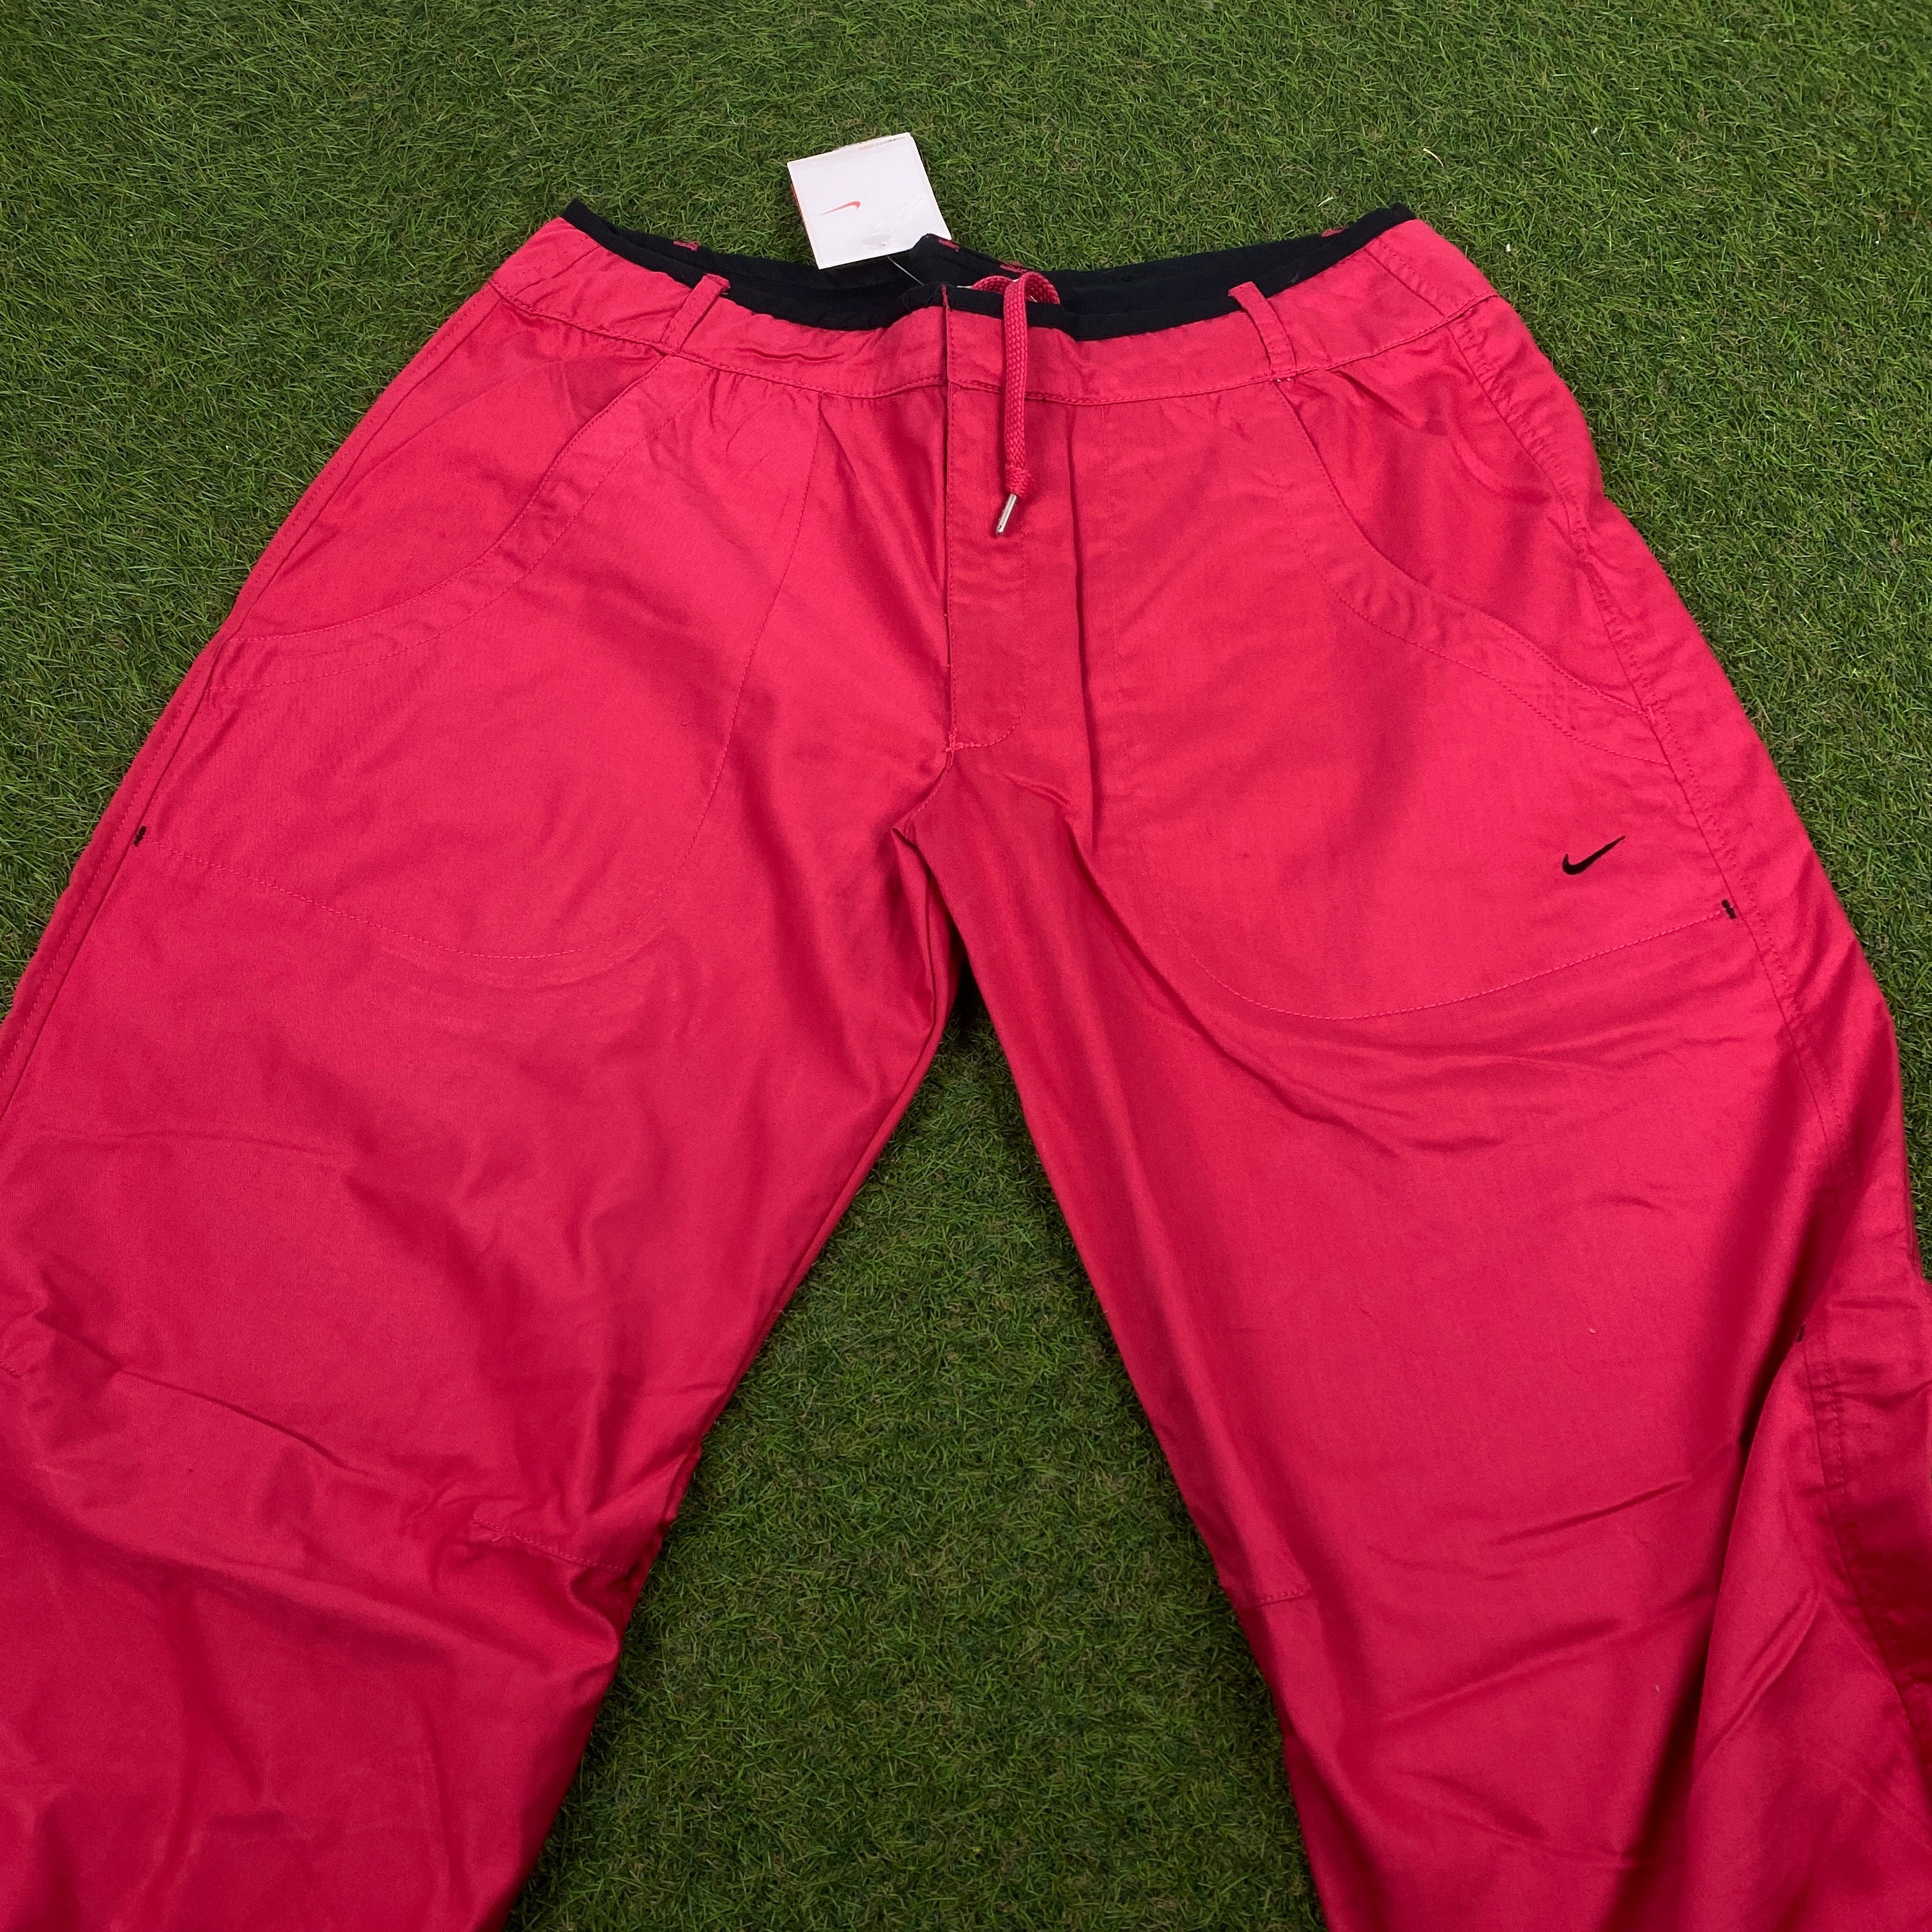 00s Nike Parachute Cargo Joggers Pink Red Large